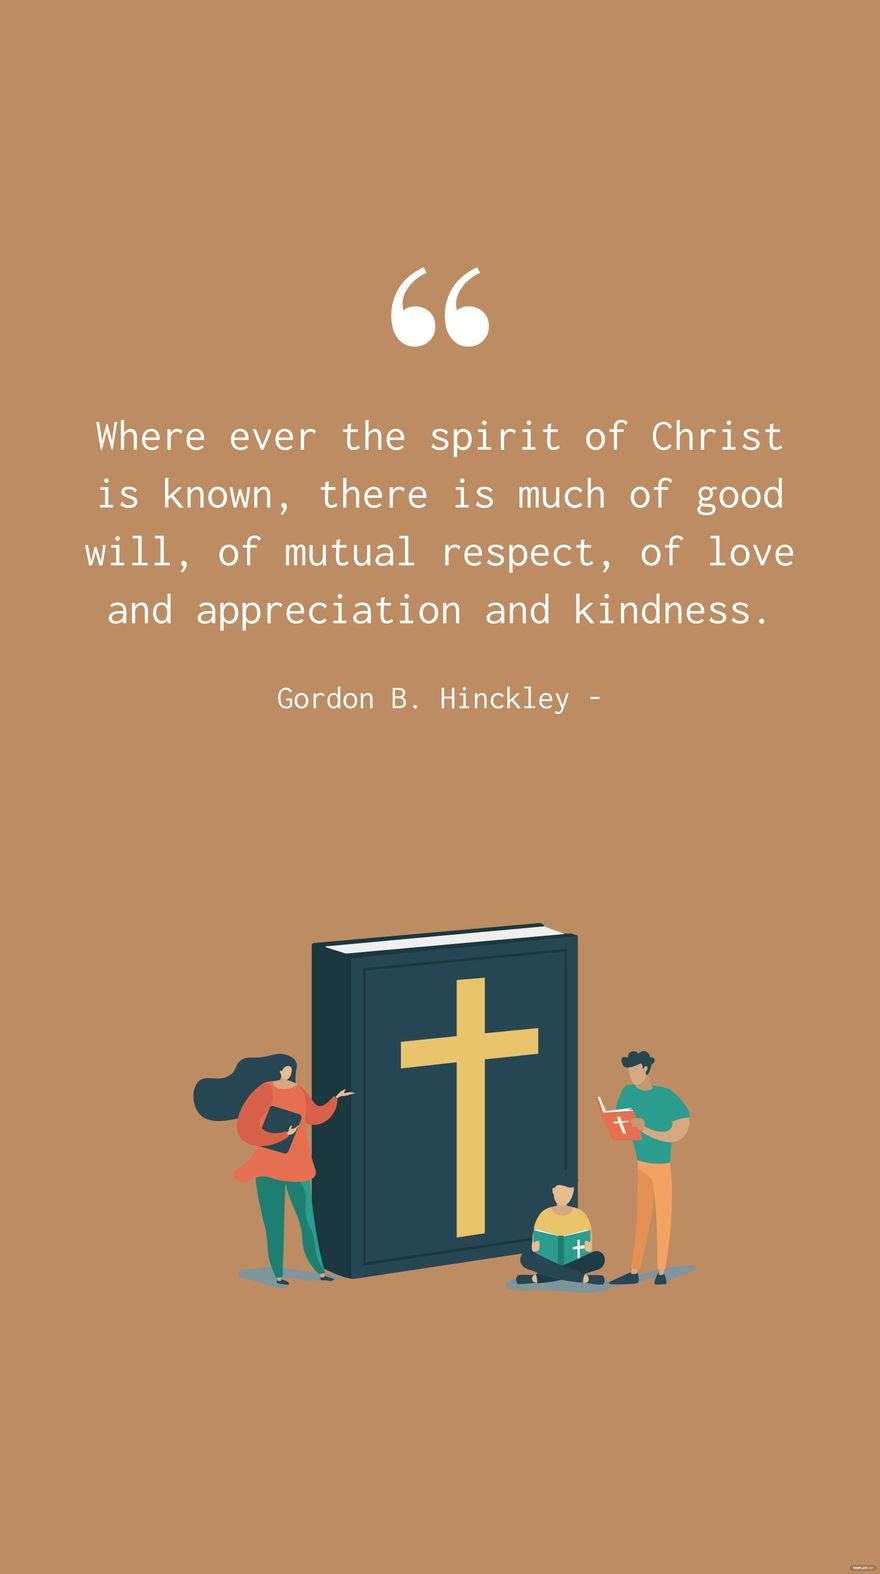 Gordon B. Hinckley - Where ever the spirit of Christ is known, there is much of good will, of mutual respect, of love and appreciation and kindness.